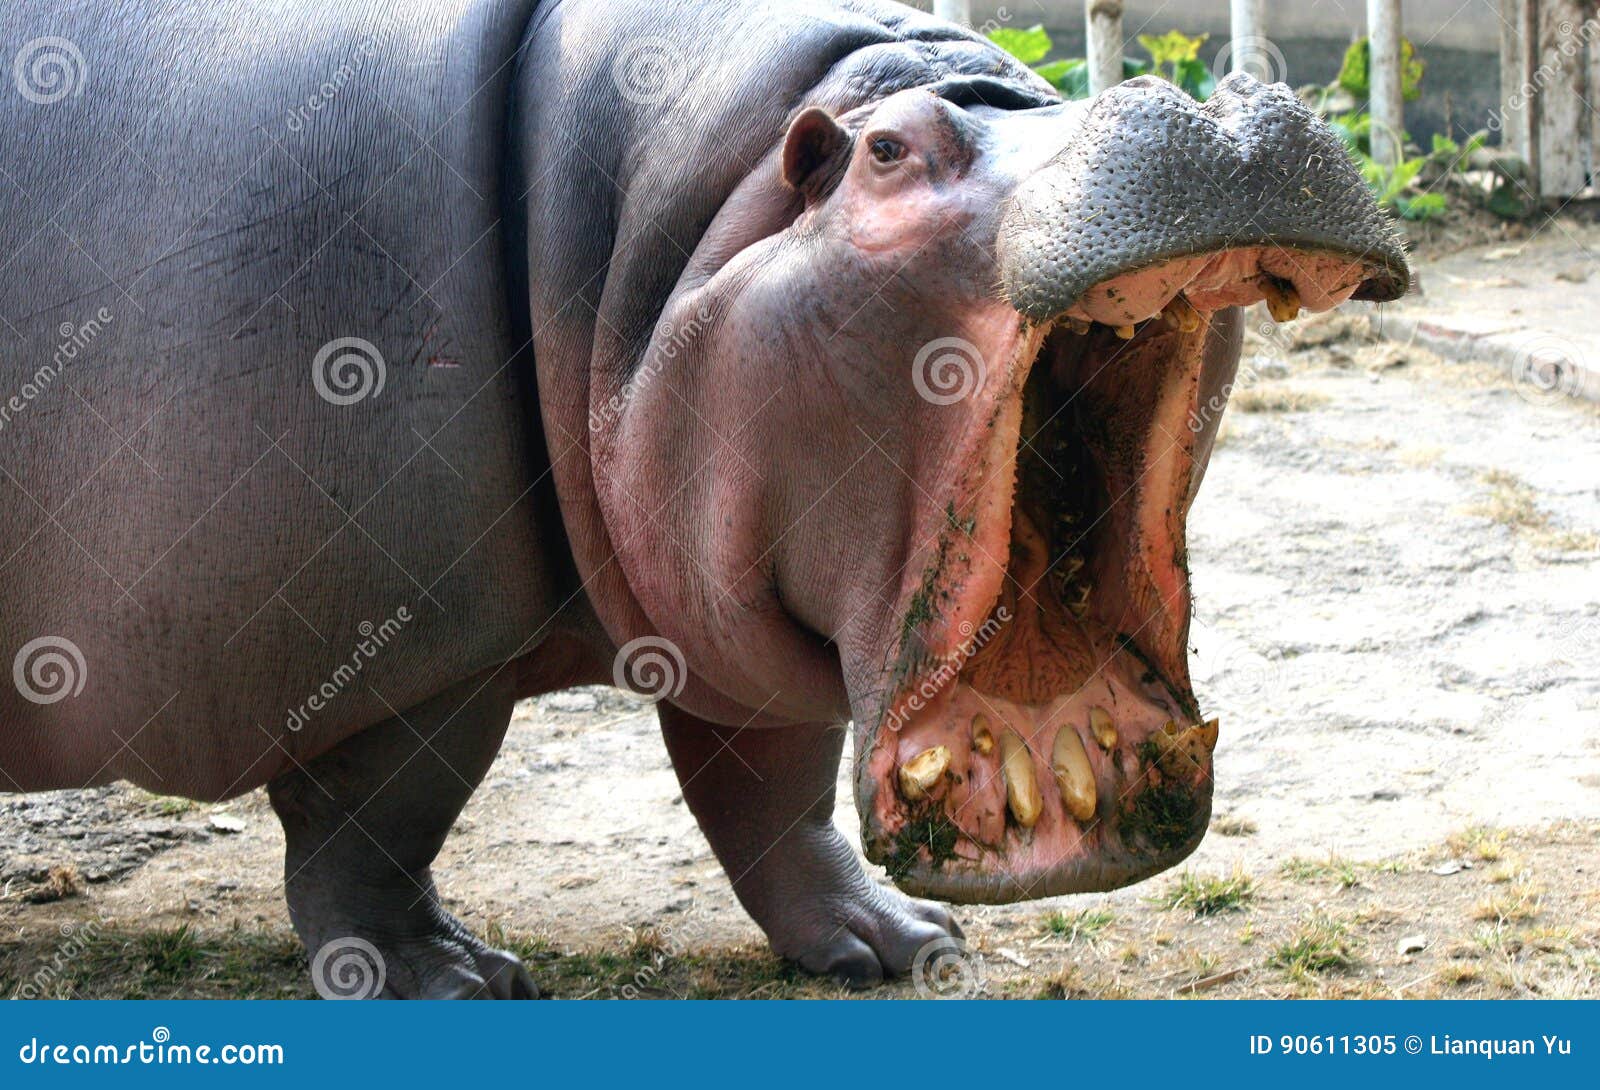 Hippo open the big mouth stock image. Image of mouth - 90611305